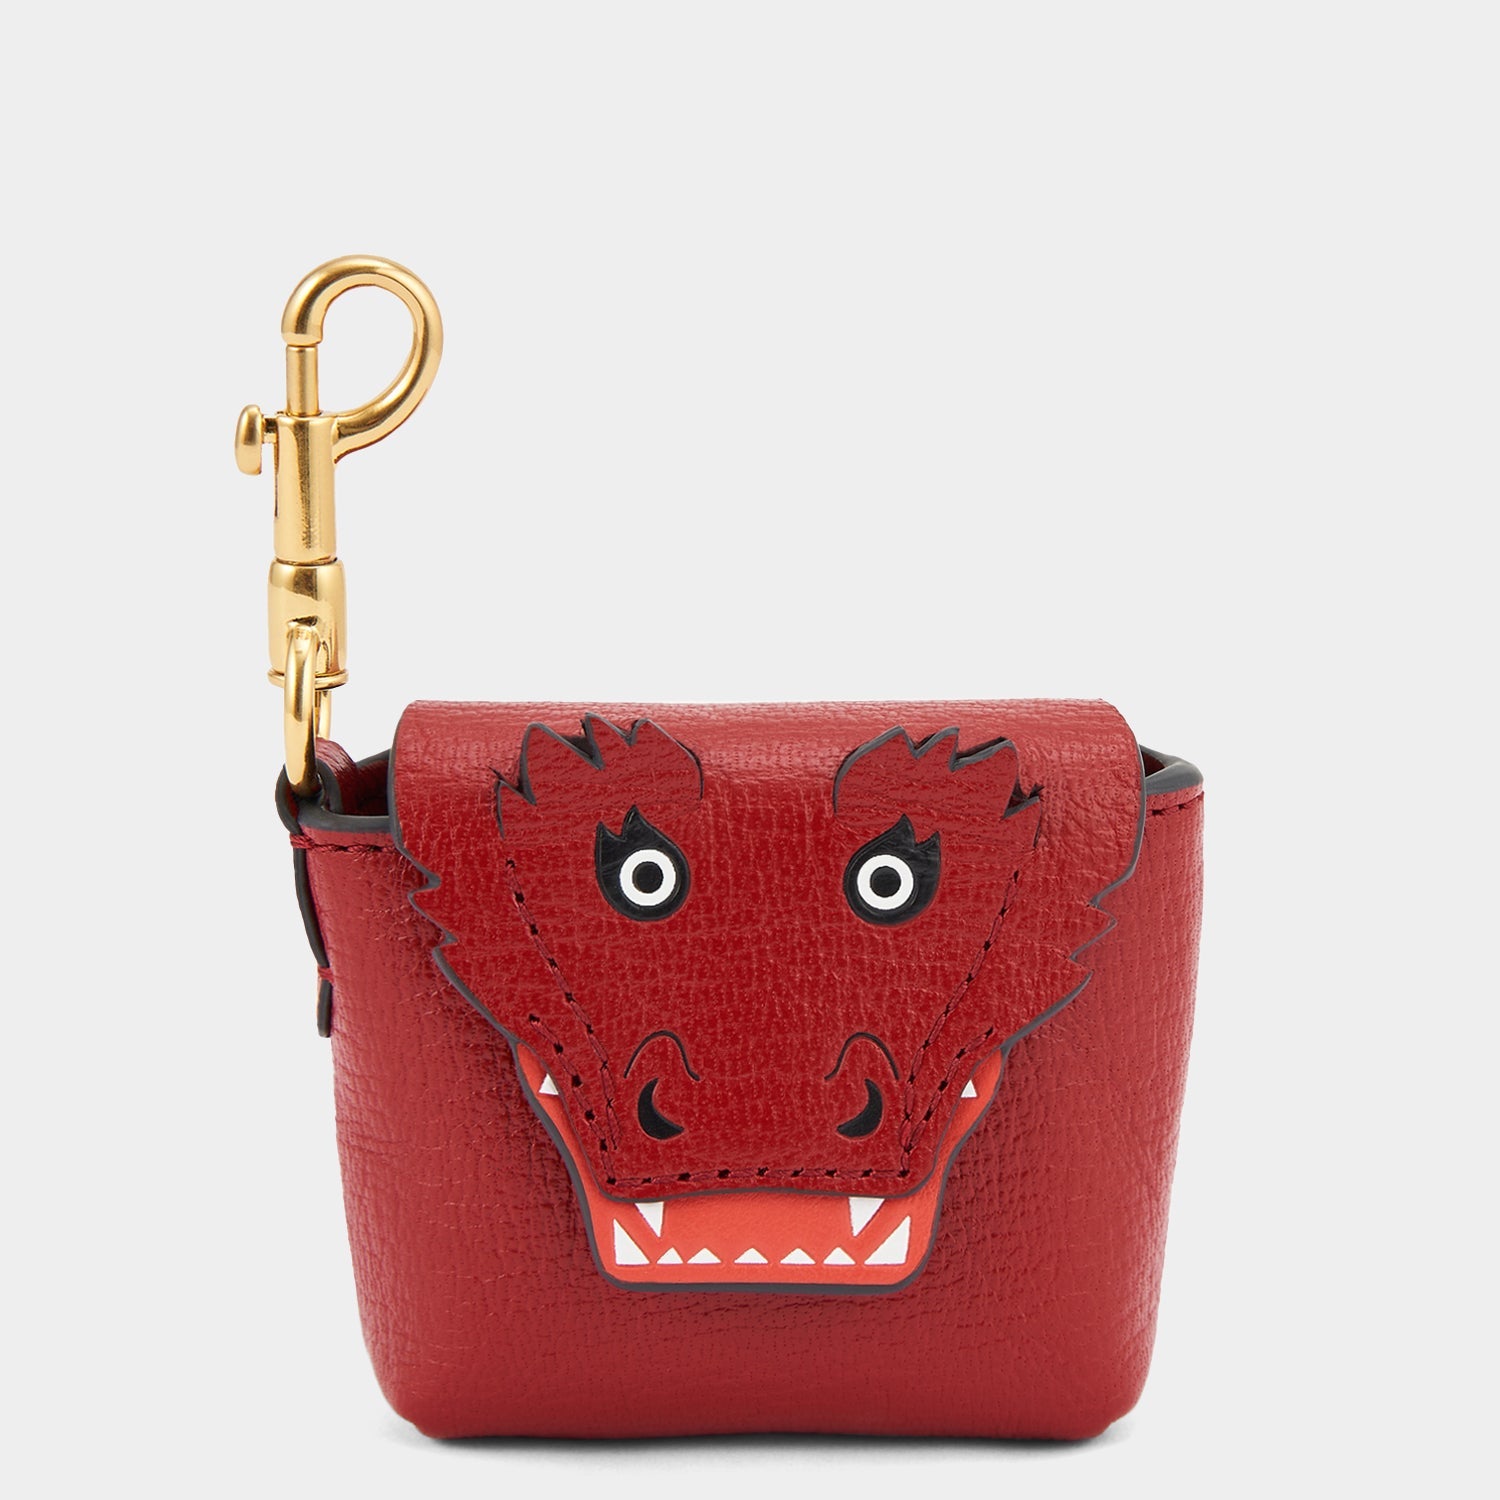 Dragon Earphones Pouch -

                  
                    Capra Leather in Russet -
                  

                  Anya Hindmarch EU
